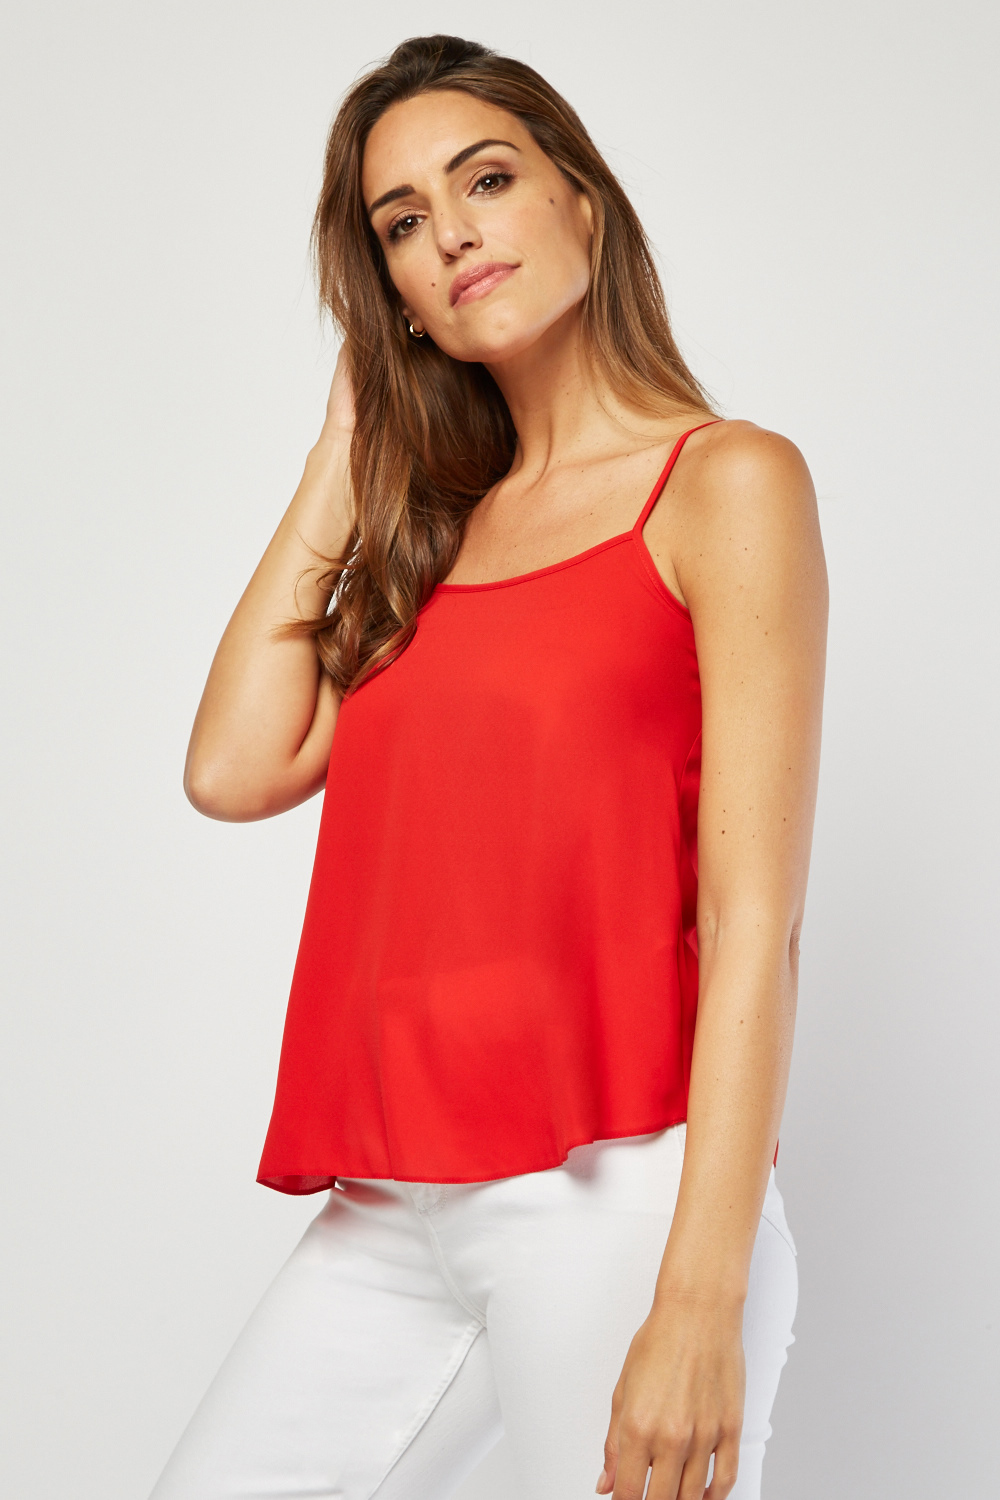 Red Chiffon Cami Top - Just $7